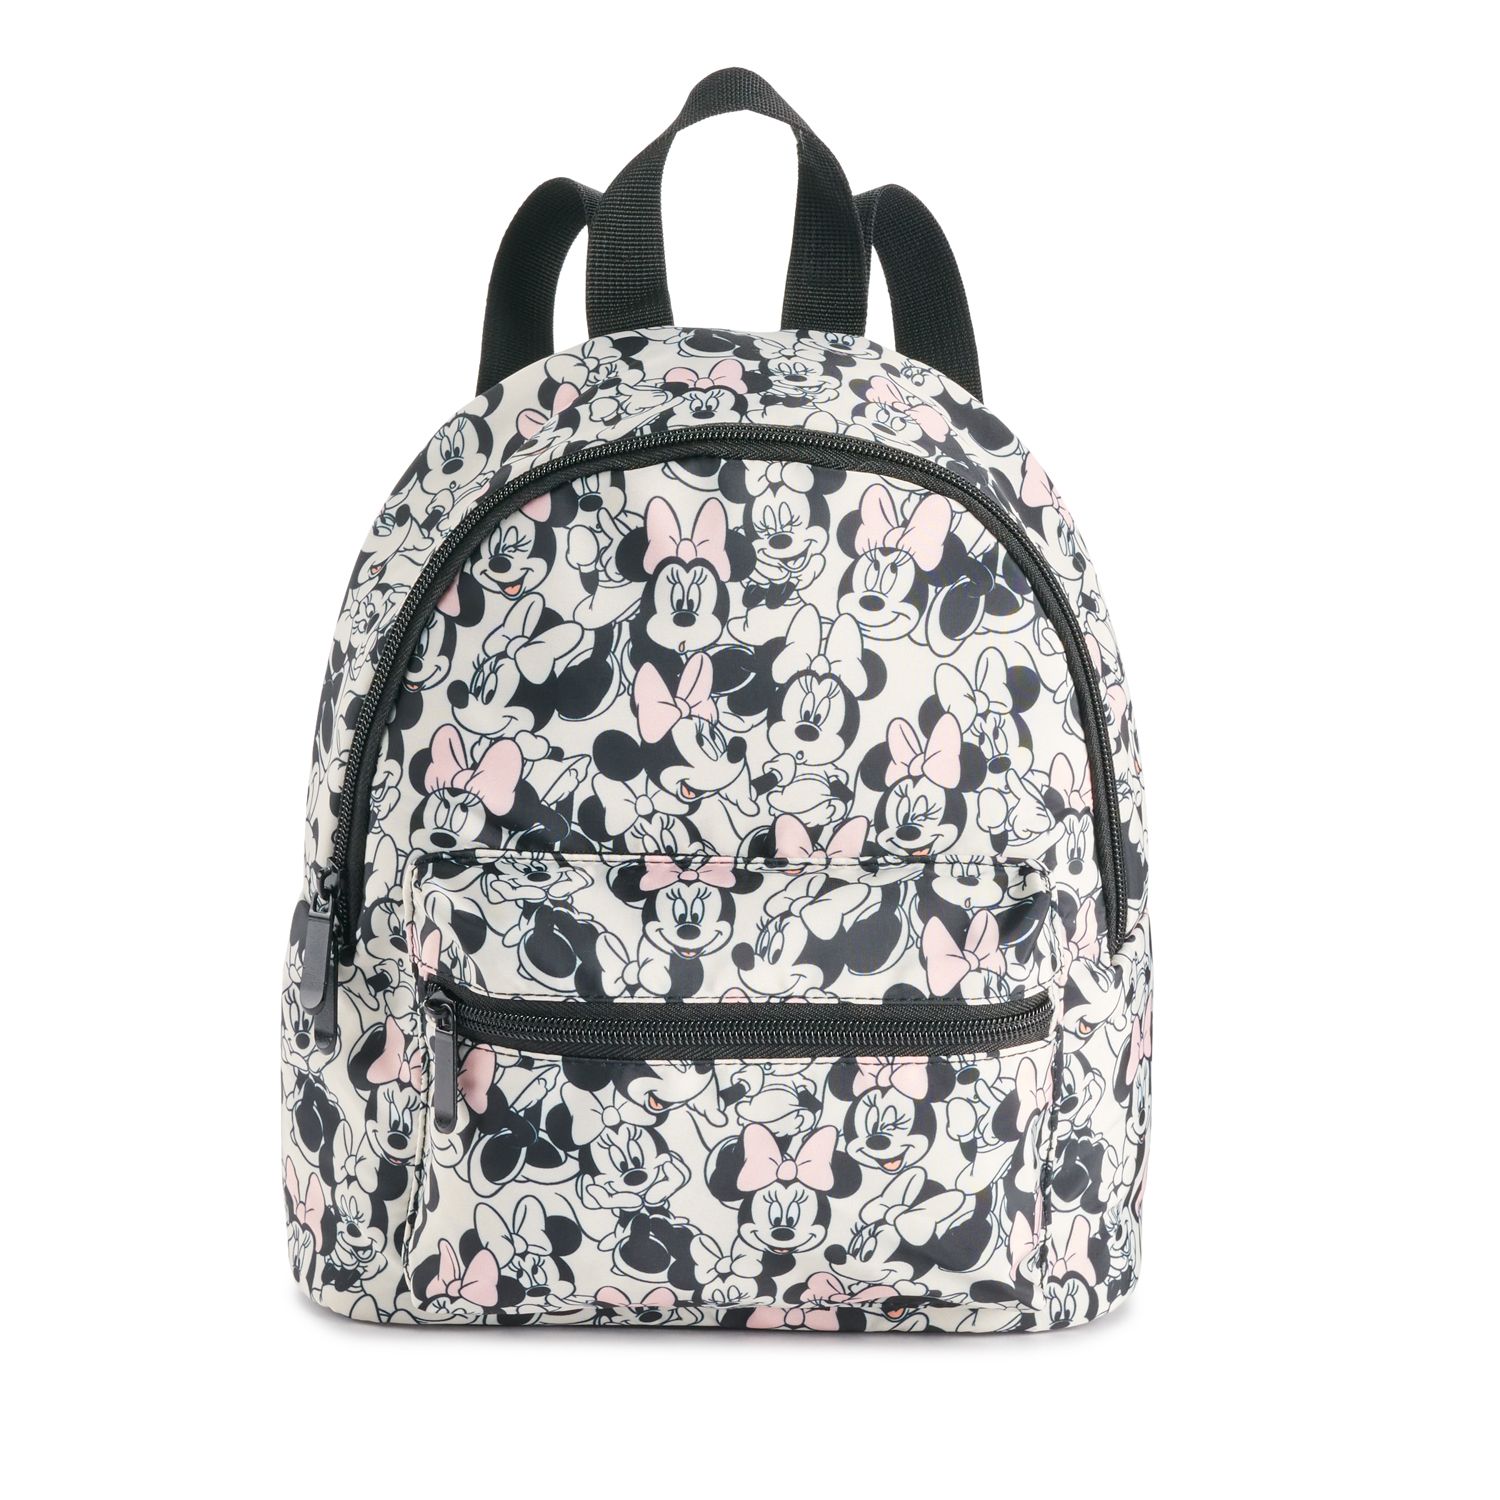 Image for Disney 's Minnie Mouse Mini Backpack at Kohl's.